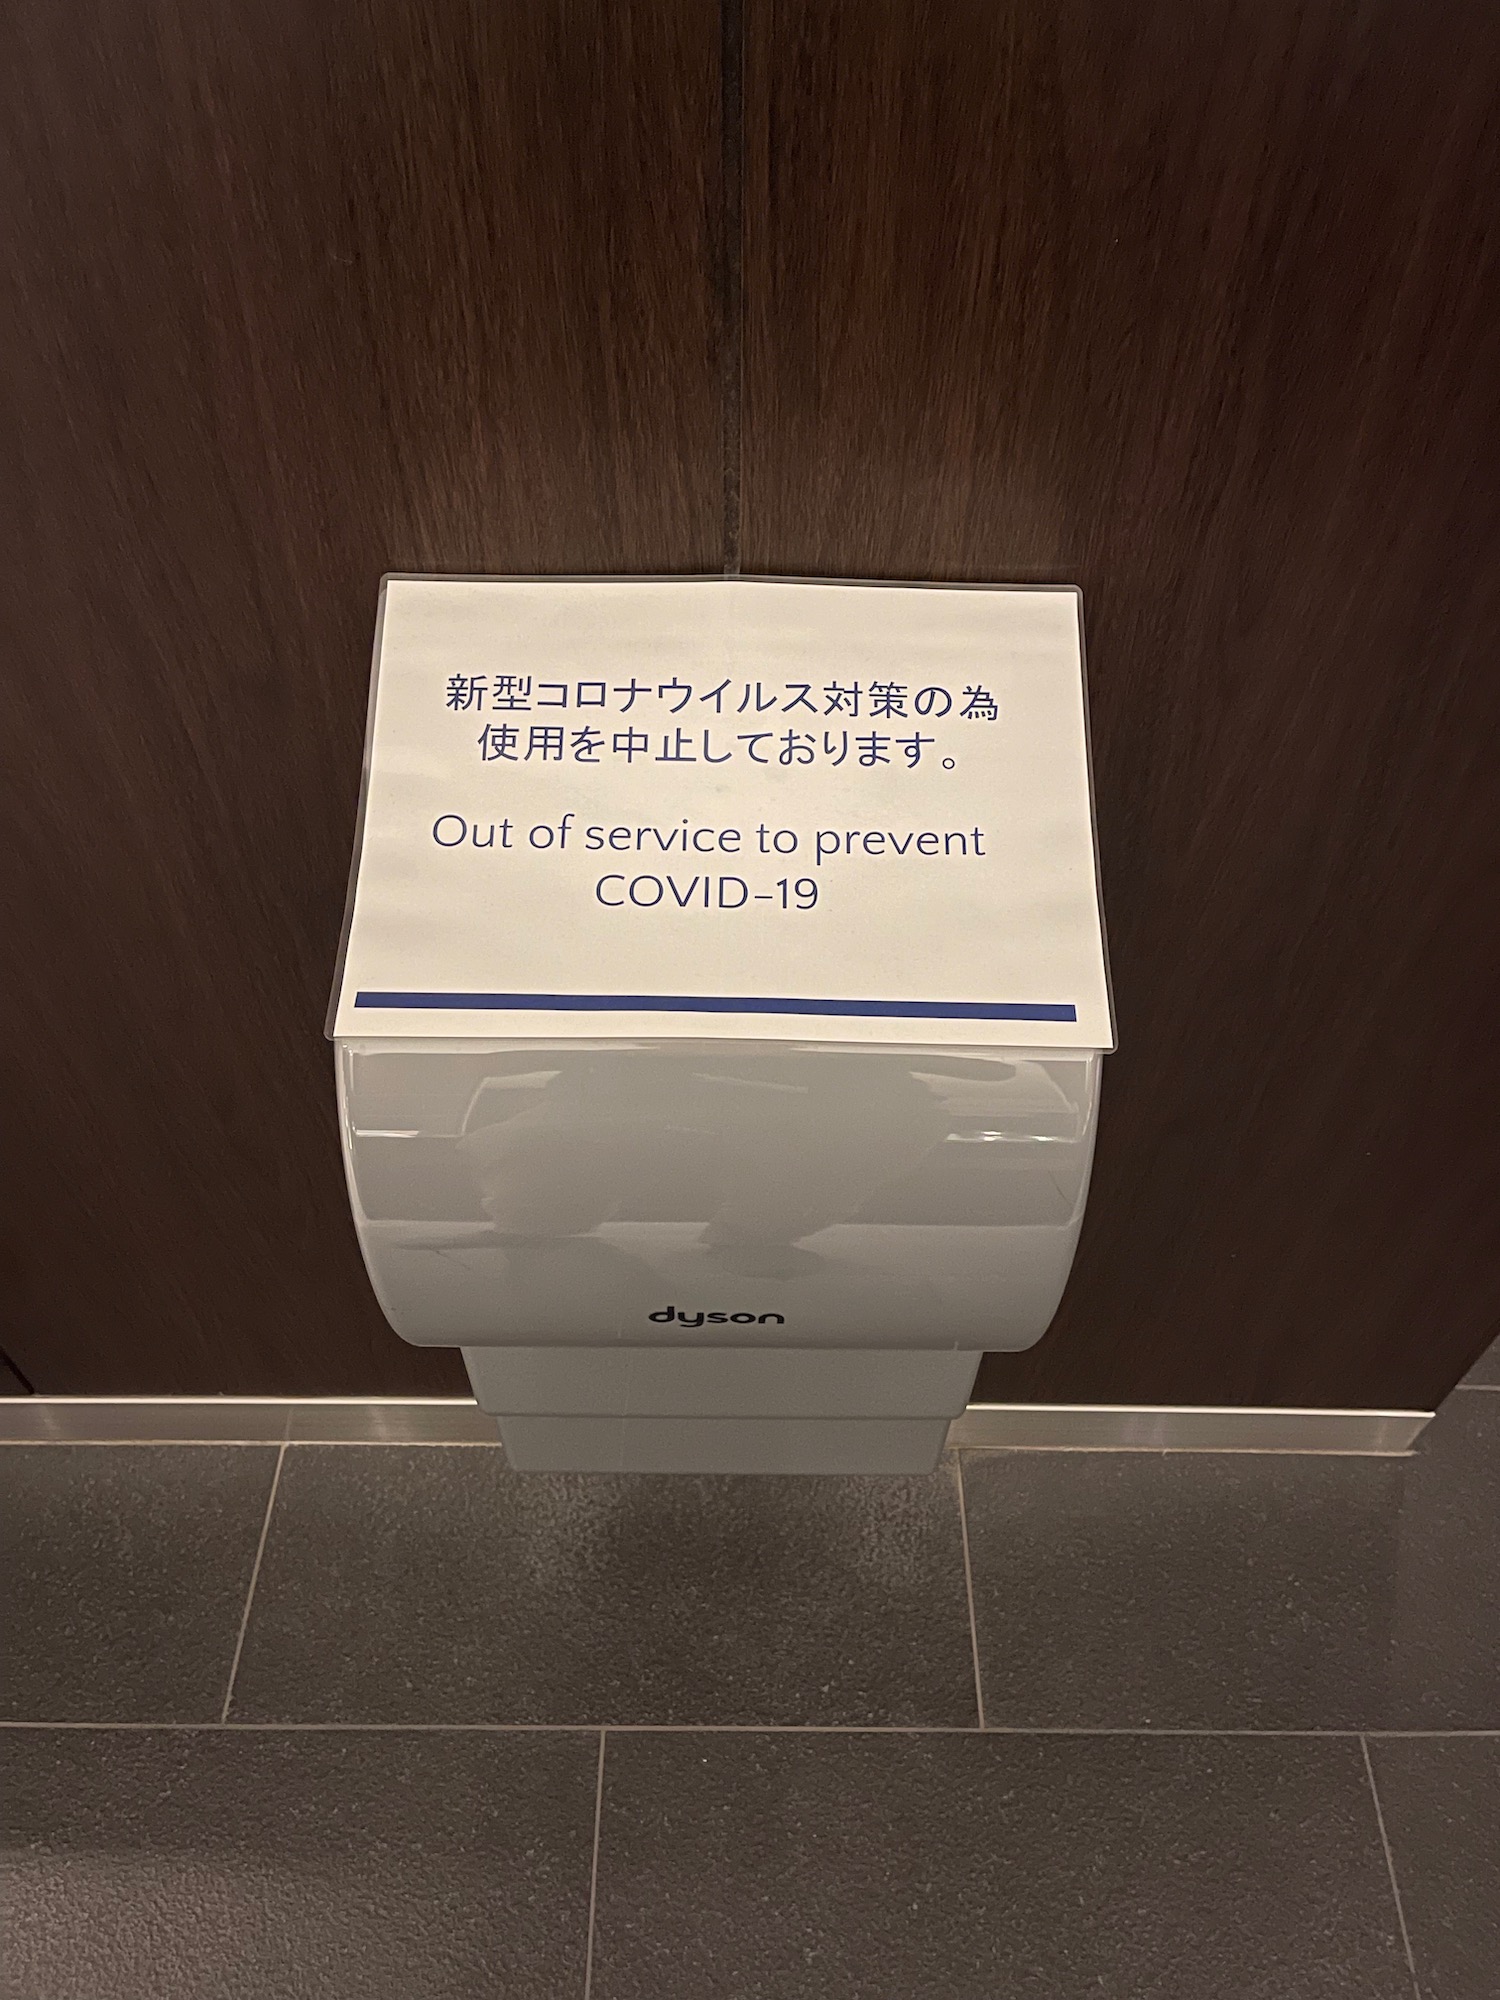 a white paper towel dispenser with a sign on the wall